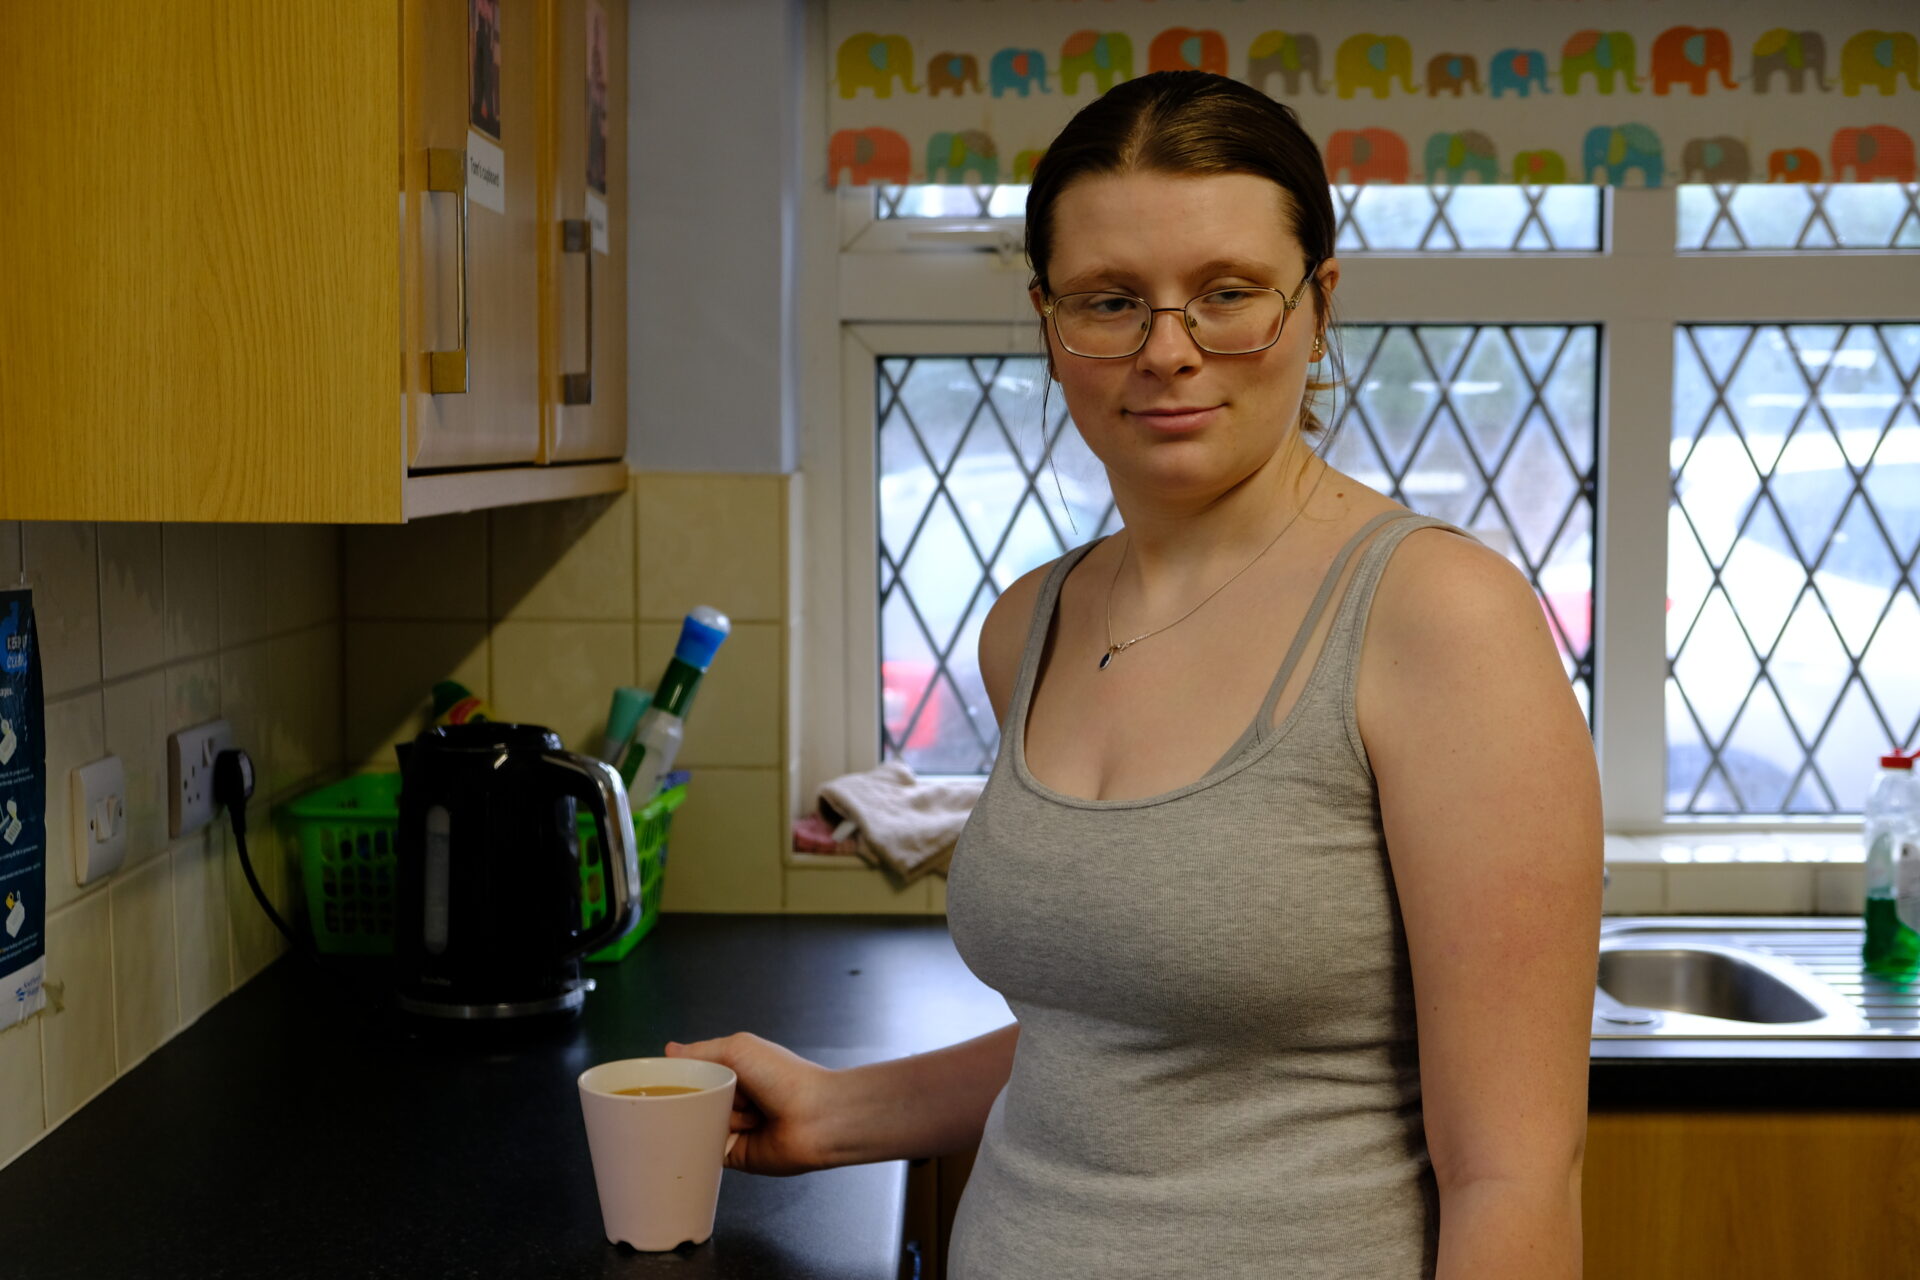 A young white woman with her hair tied back is standing in the kitchen. She is holding a white mug. The window is behind her.